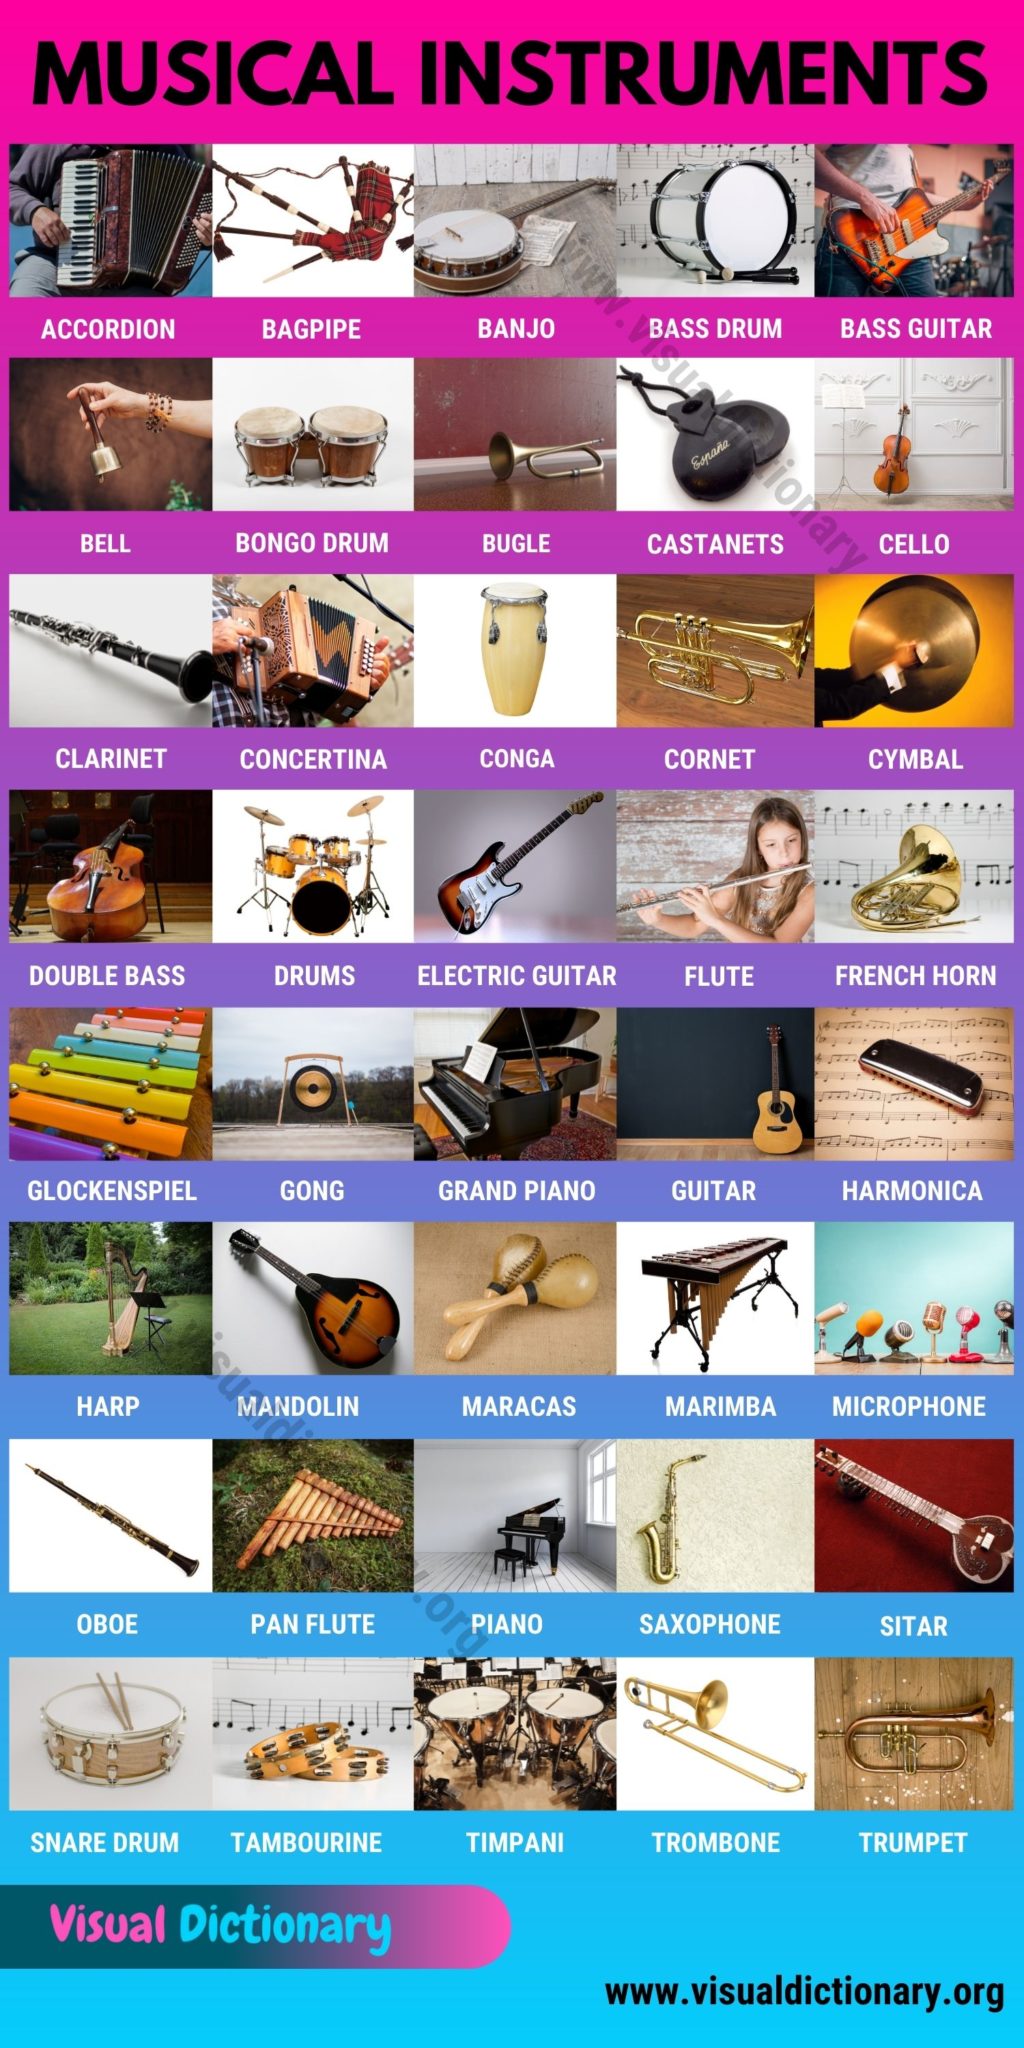 Musical Instruments: List of 50 Popular Musical Instruments - Visual